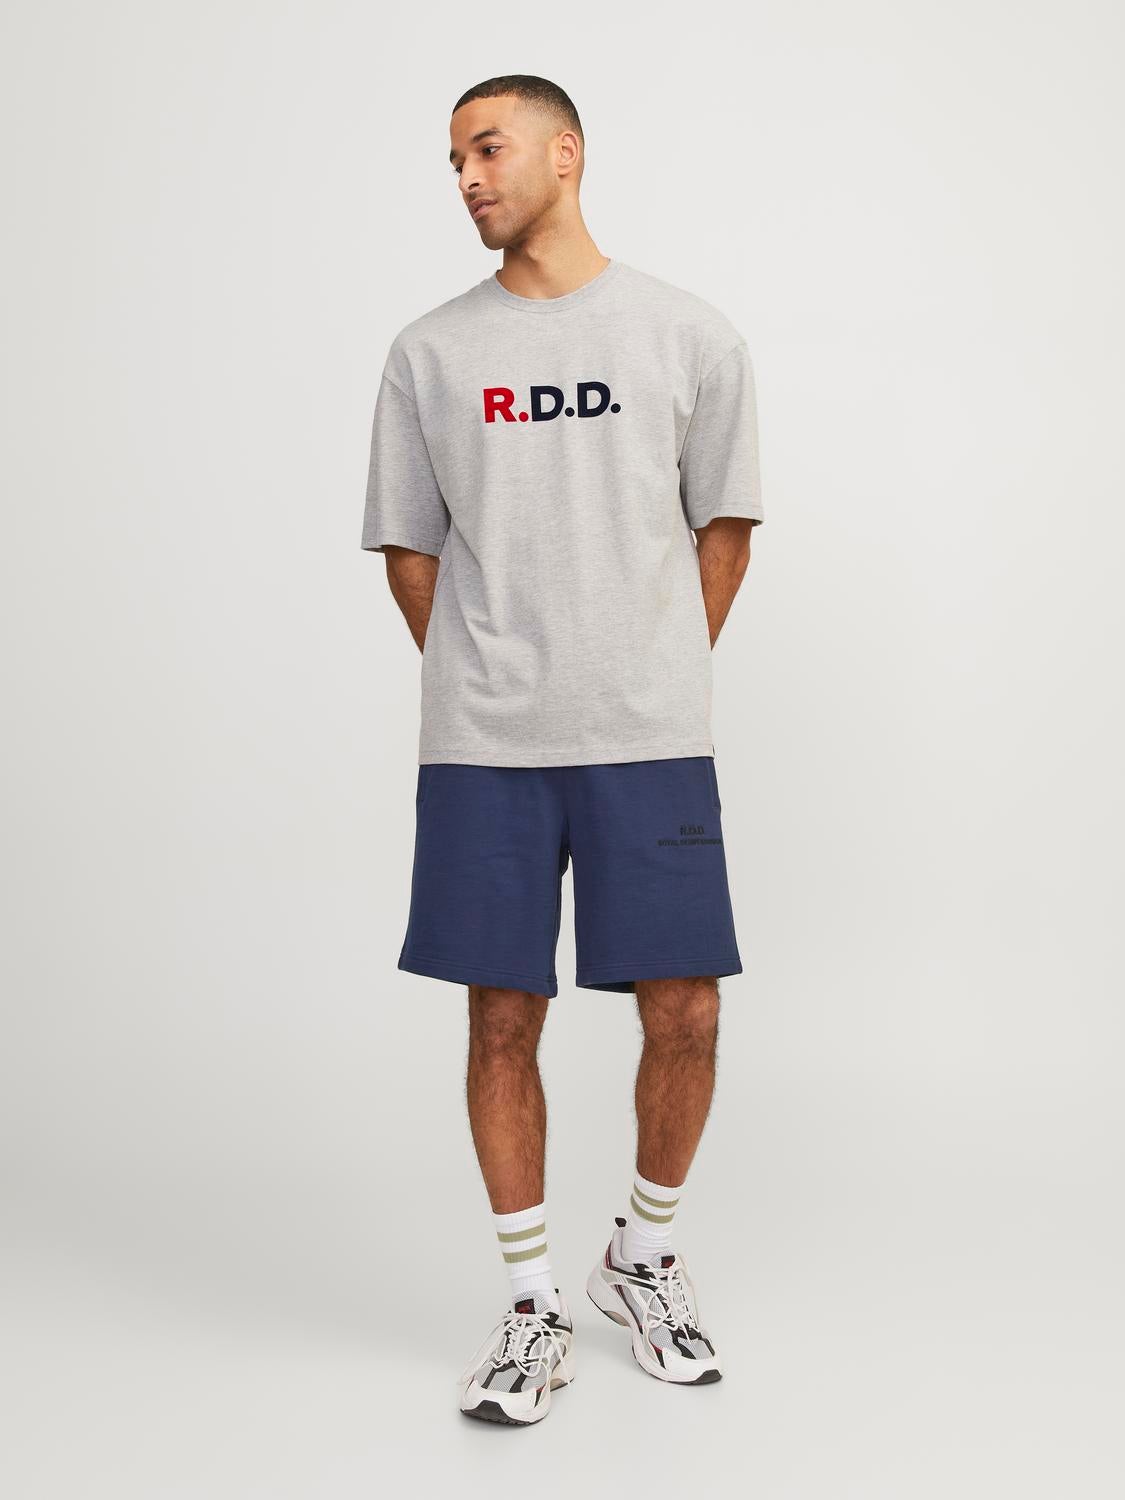 RDD Relaxed Fit Sweatstof shorts